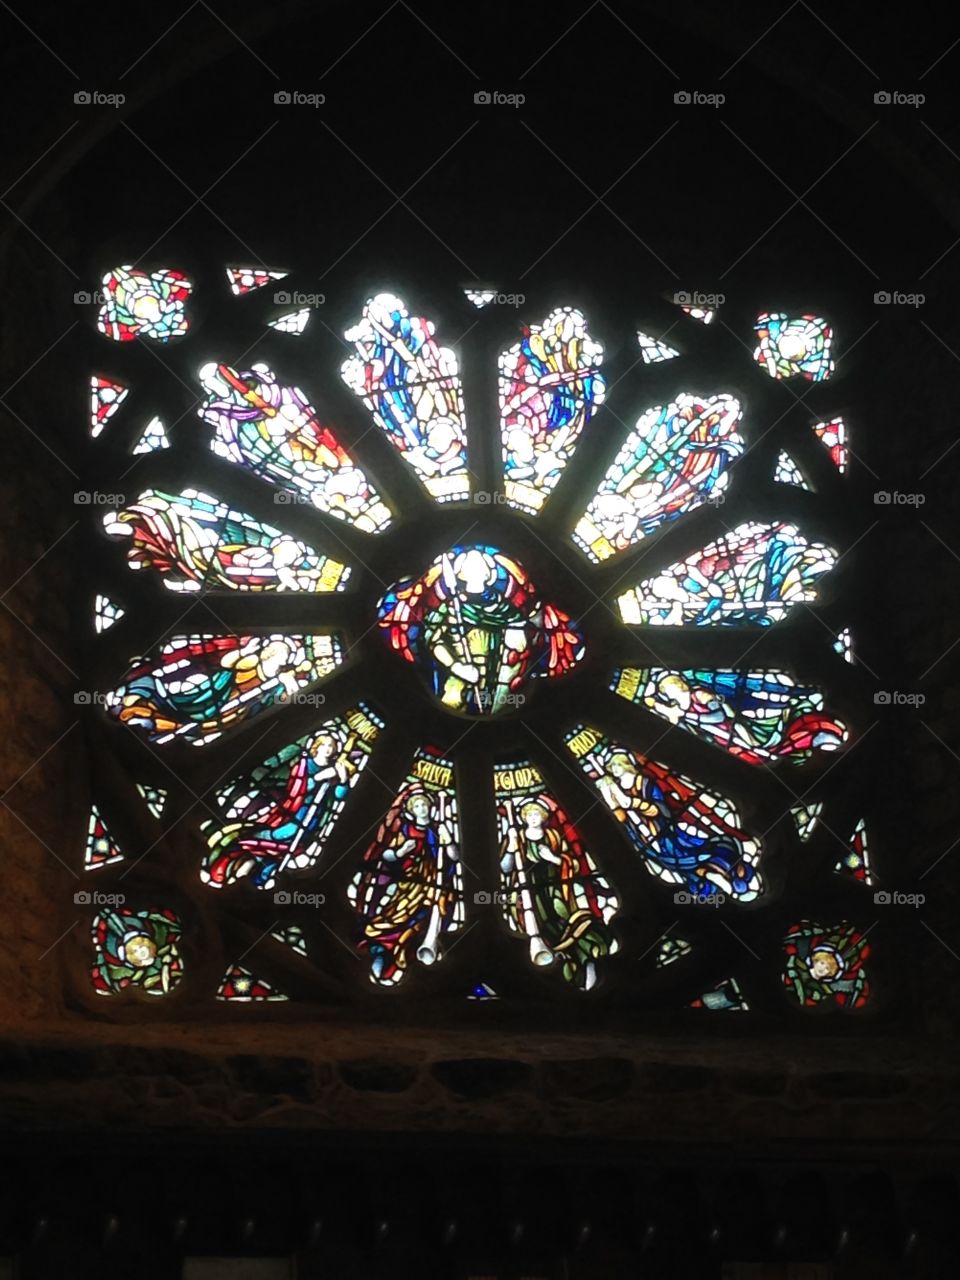 A circle of saints or angels in stain glass window of a church.